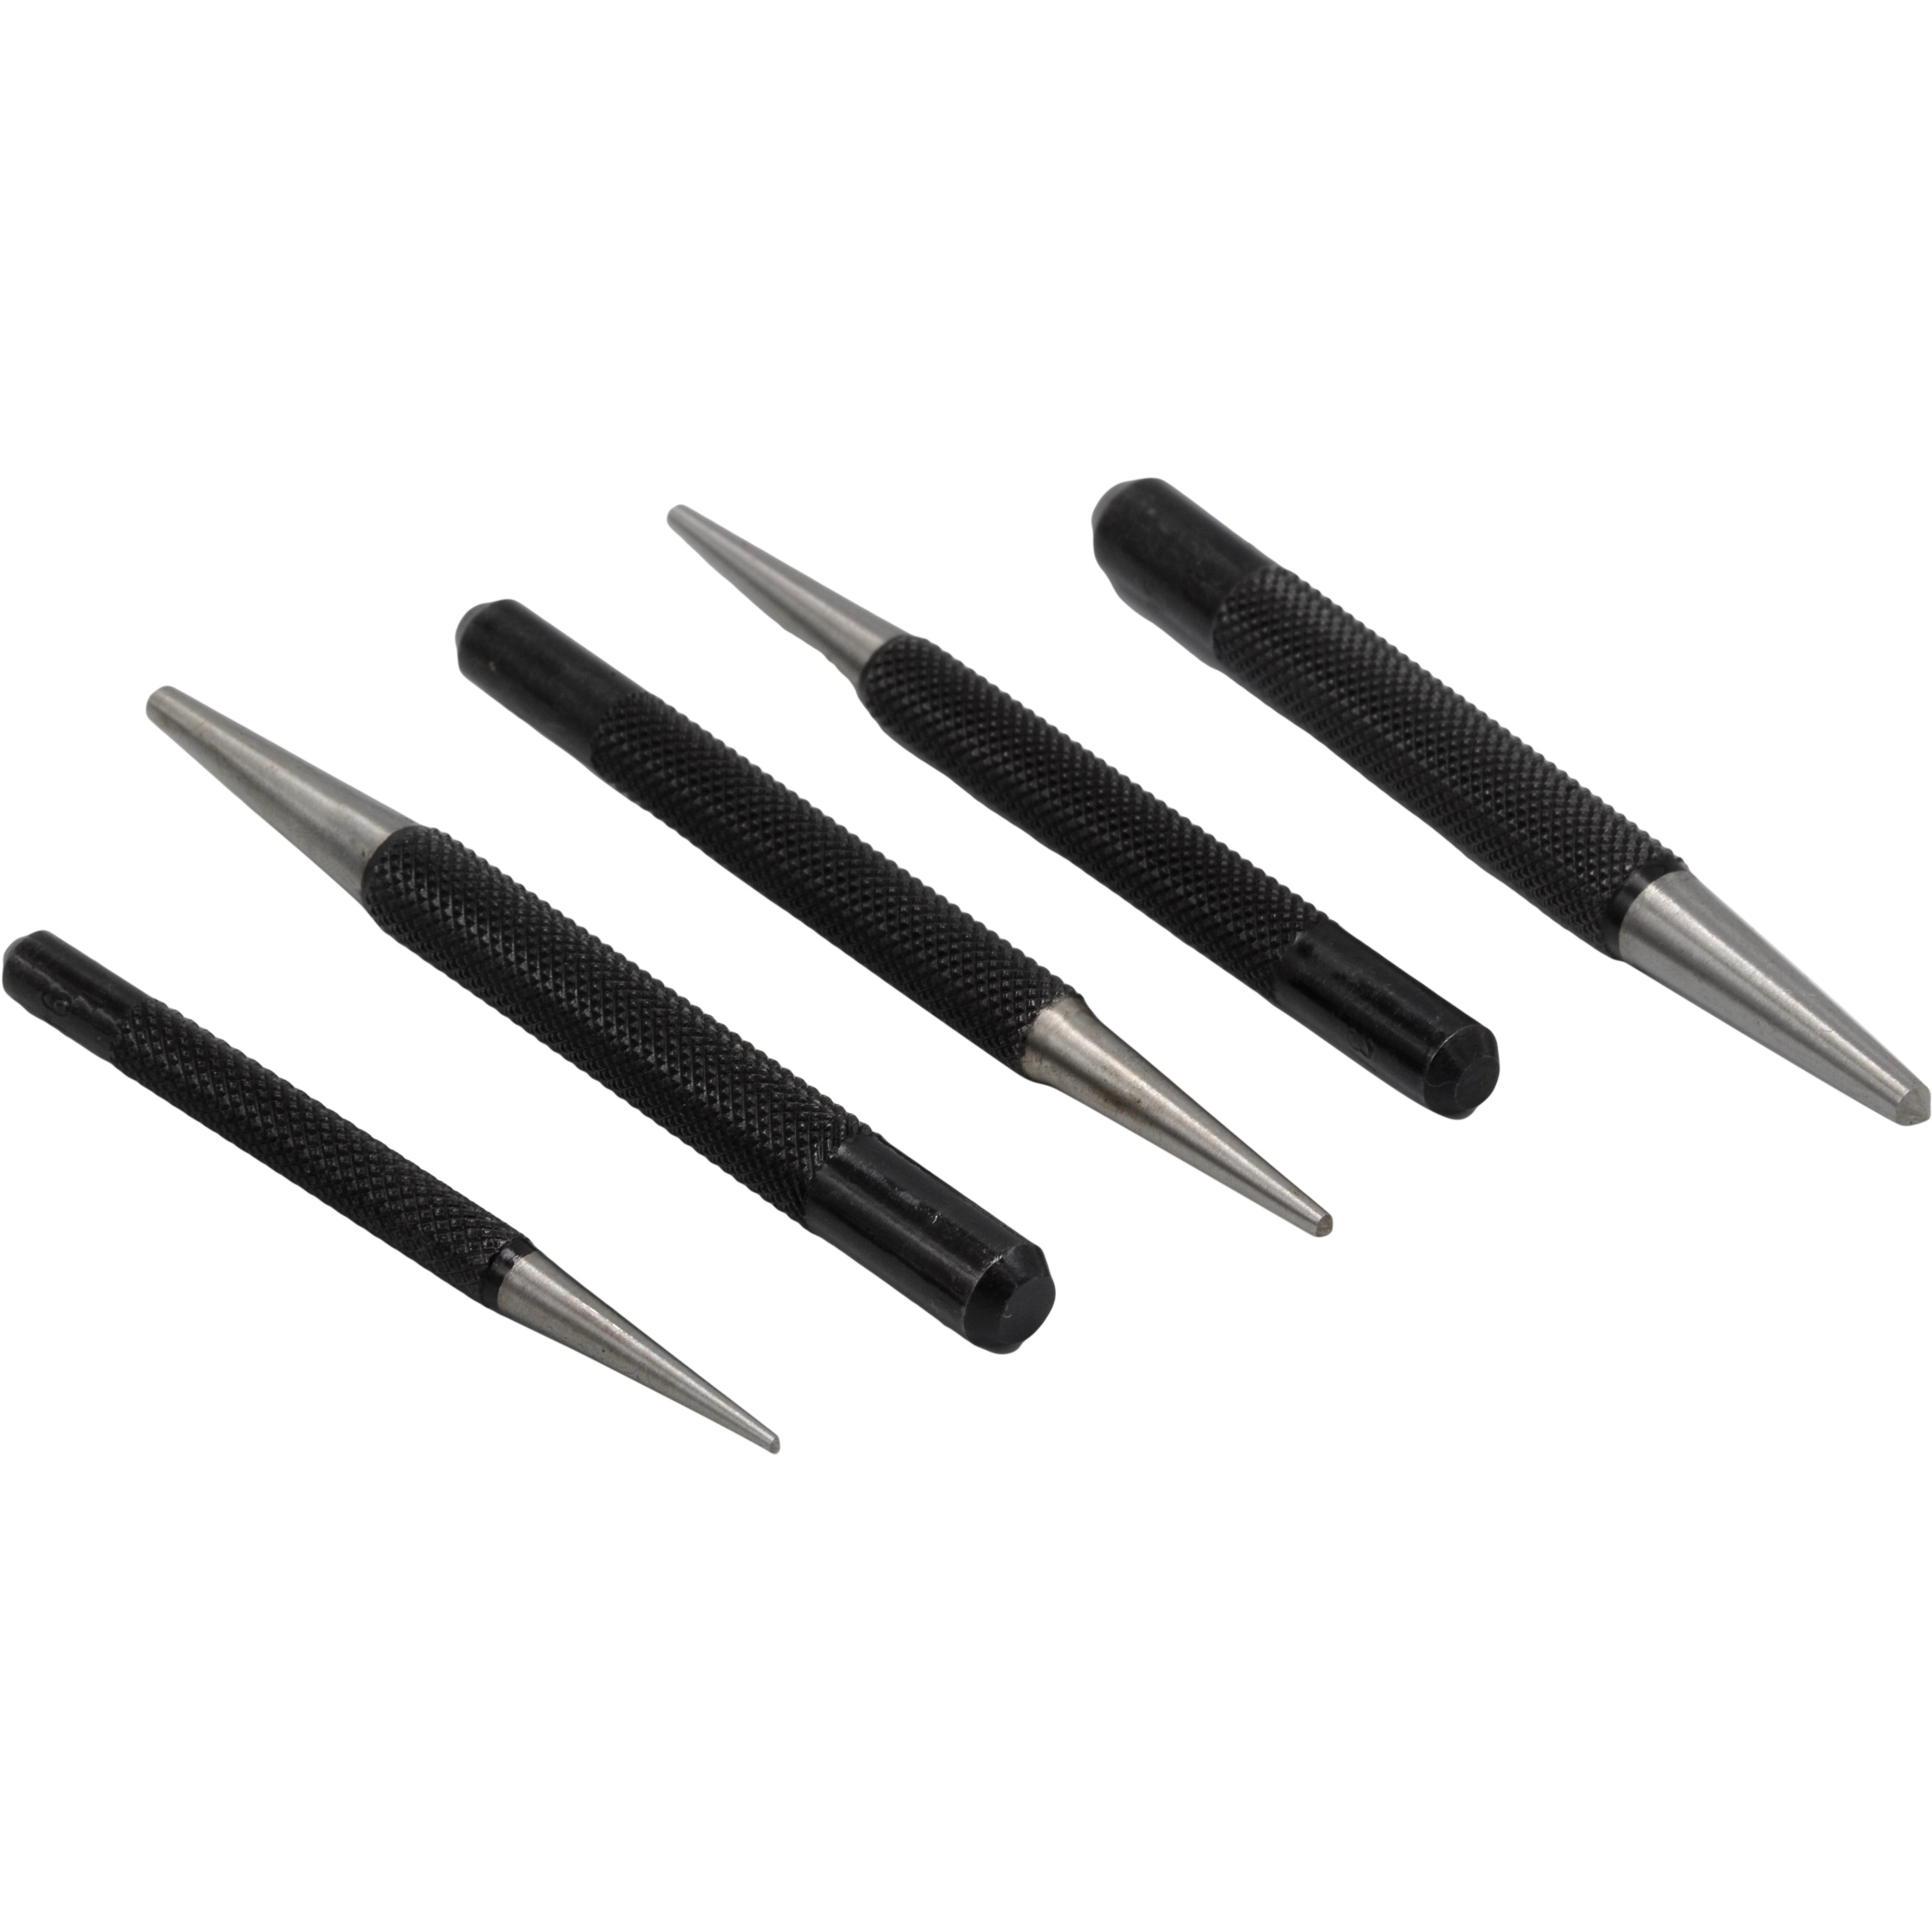 Set of 5 Piece Round Head Centre Punches